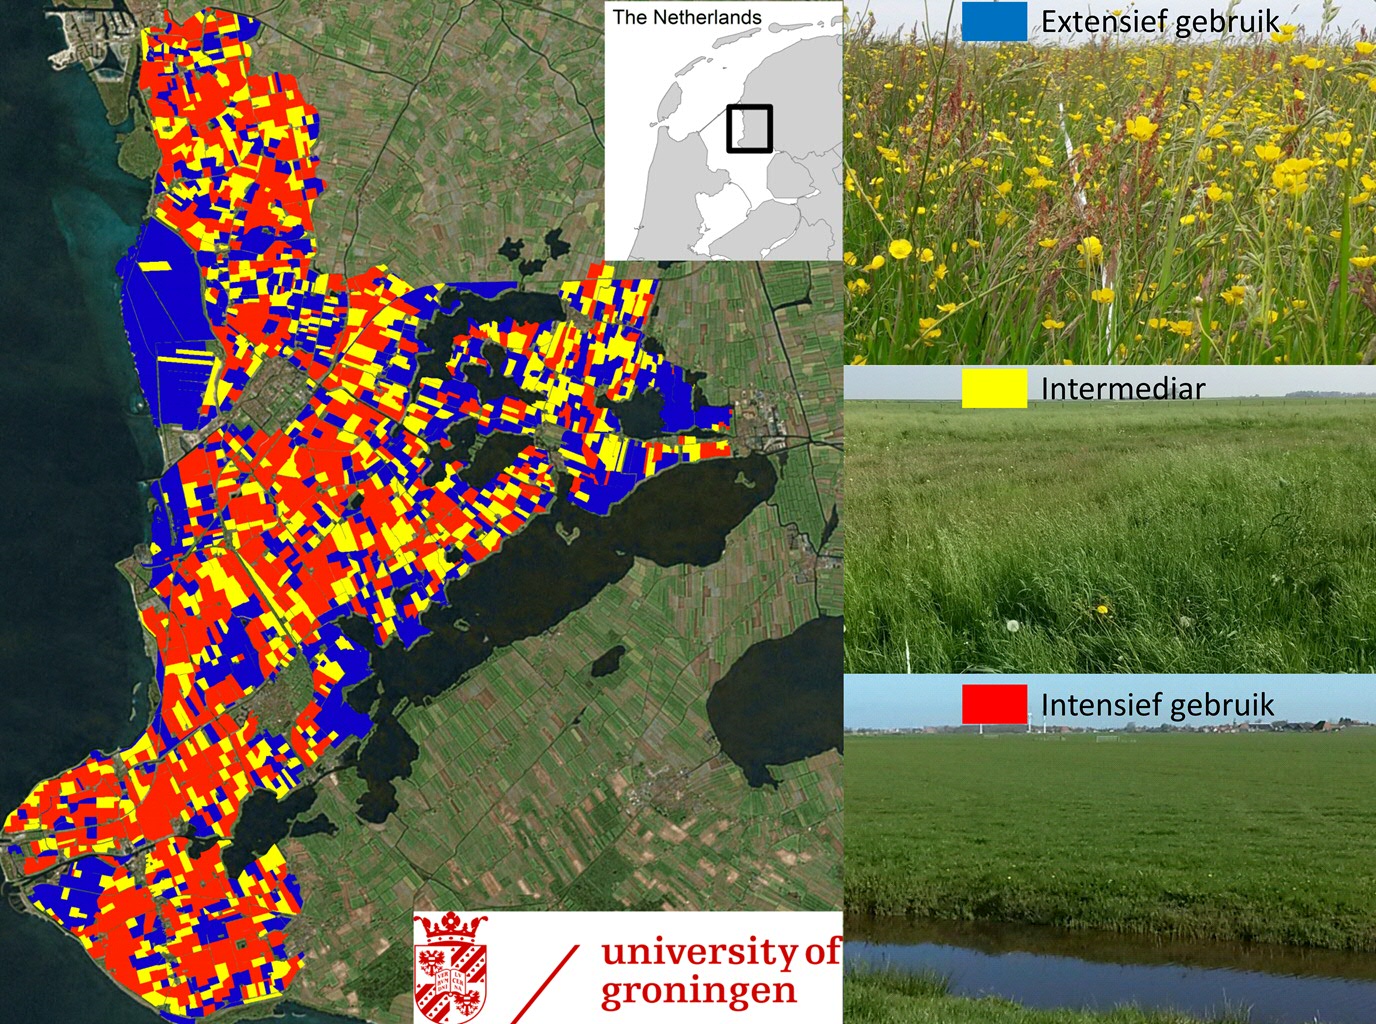 Figure 1. Summarizing the variation in ‘surface roughness’, captured by the ESA radar coverages, we accurately estimate both land use intensity and plant community composition, verified with extensive ground surveys. Foto credits: Kaart en foto's door Ruth Howison